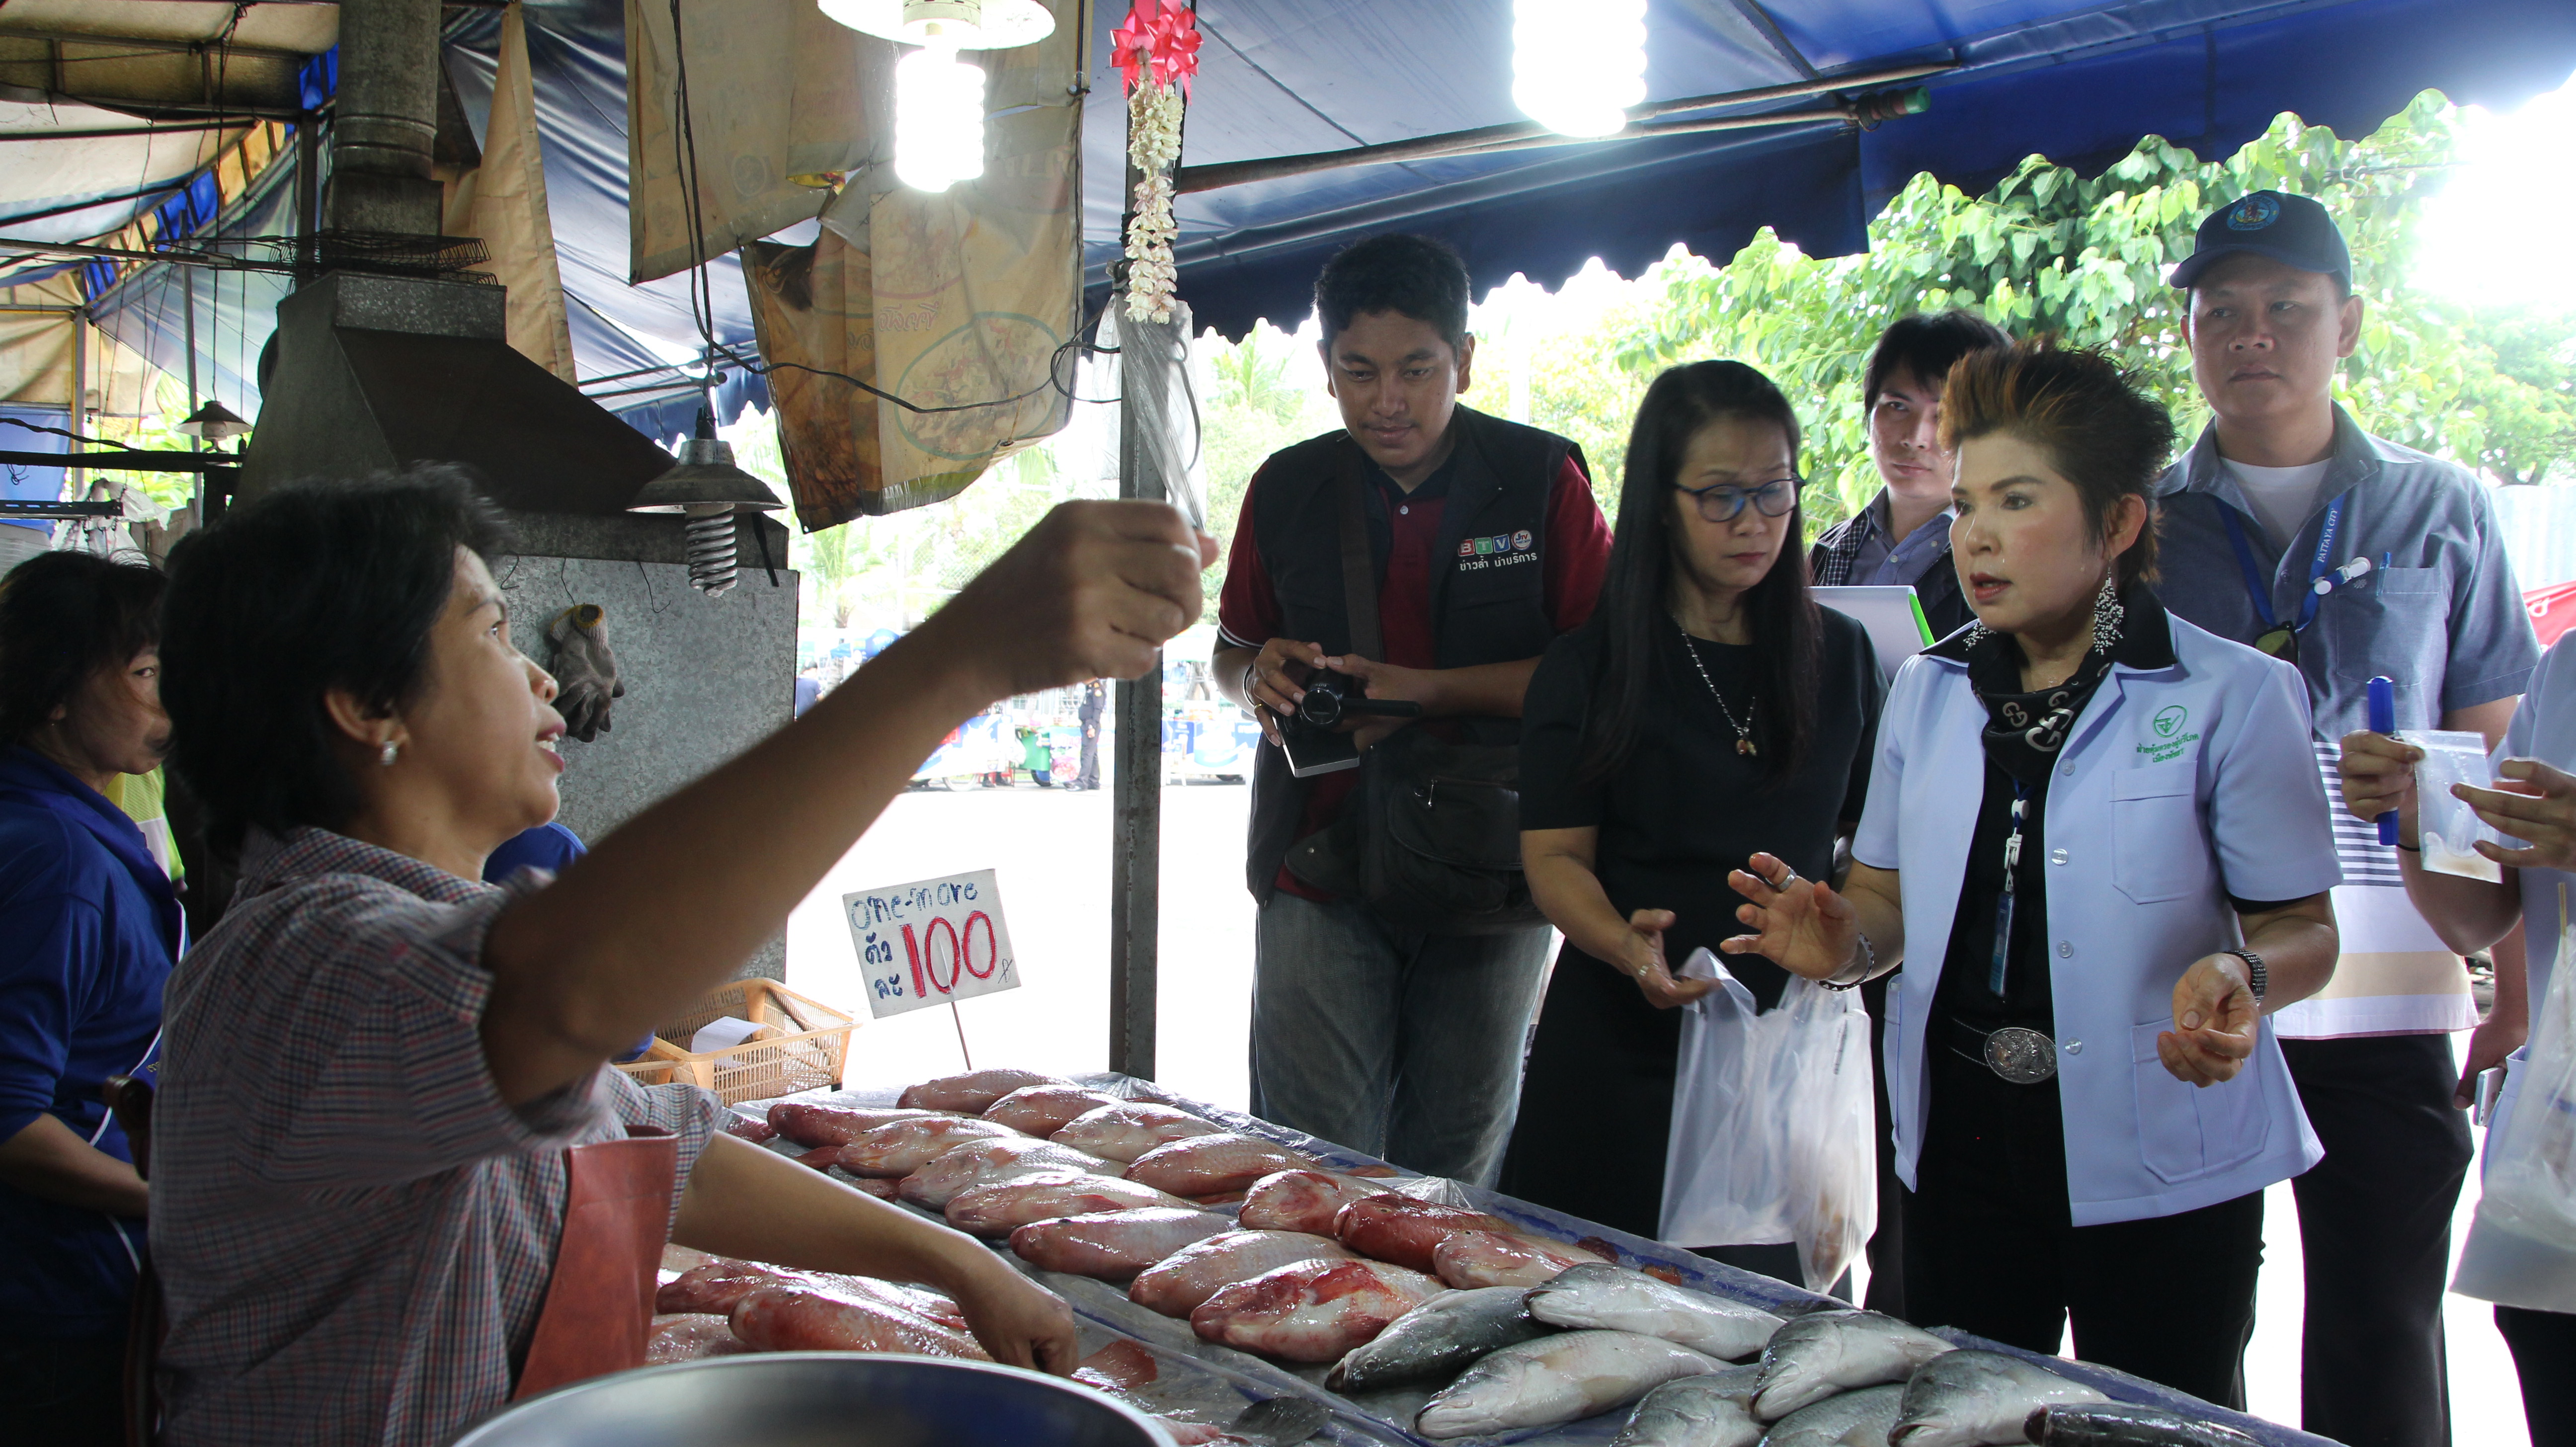 Buppa Songsakulchai of the Pattaya Public Health Department leads inspectors on another check at Naklua Market. No contaminants were found.